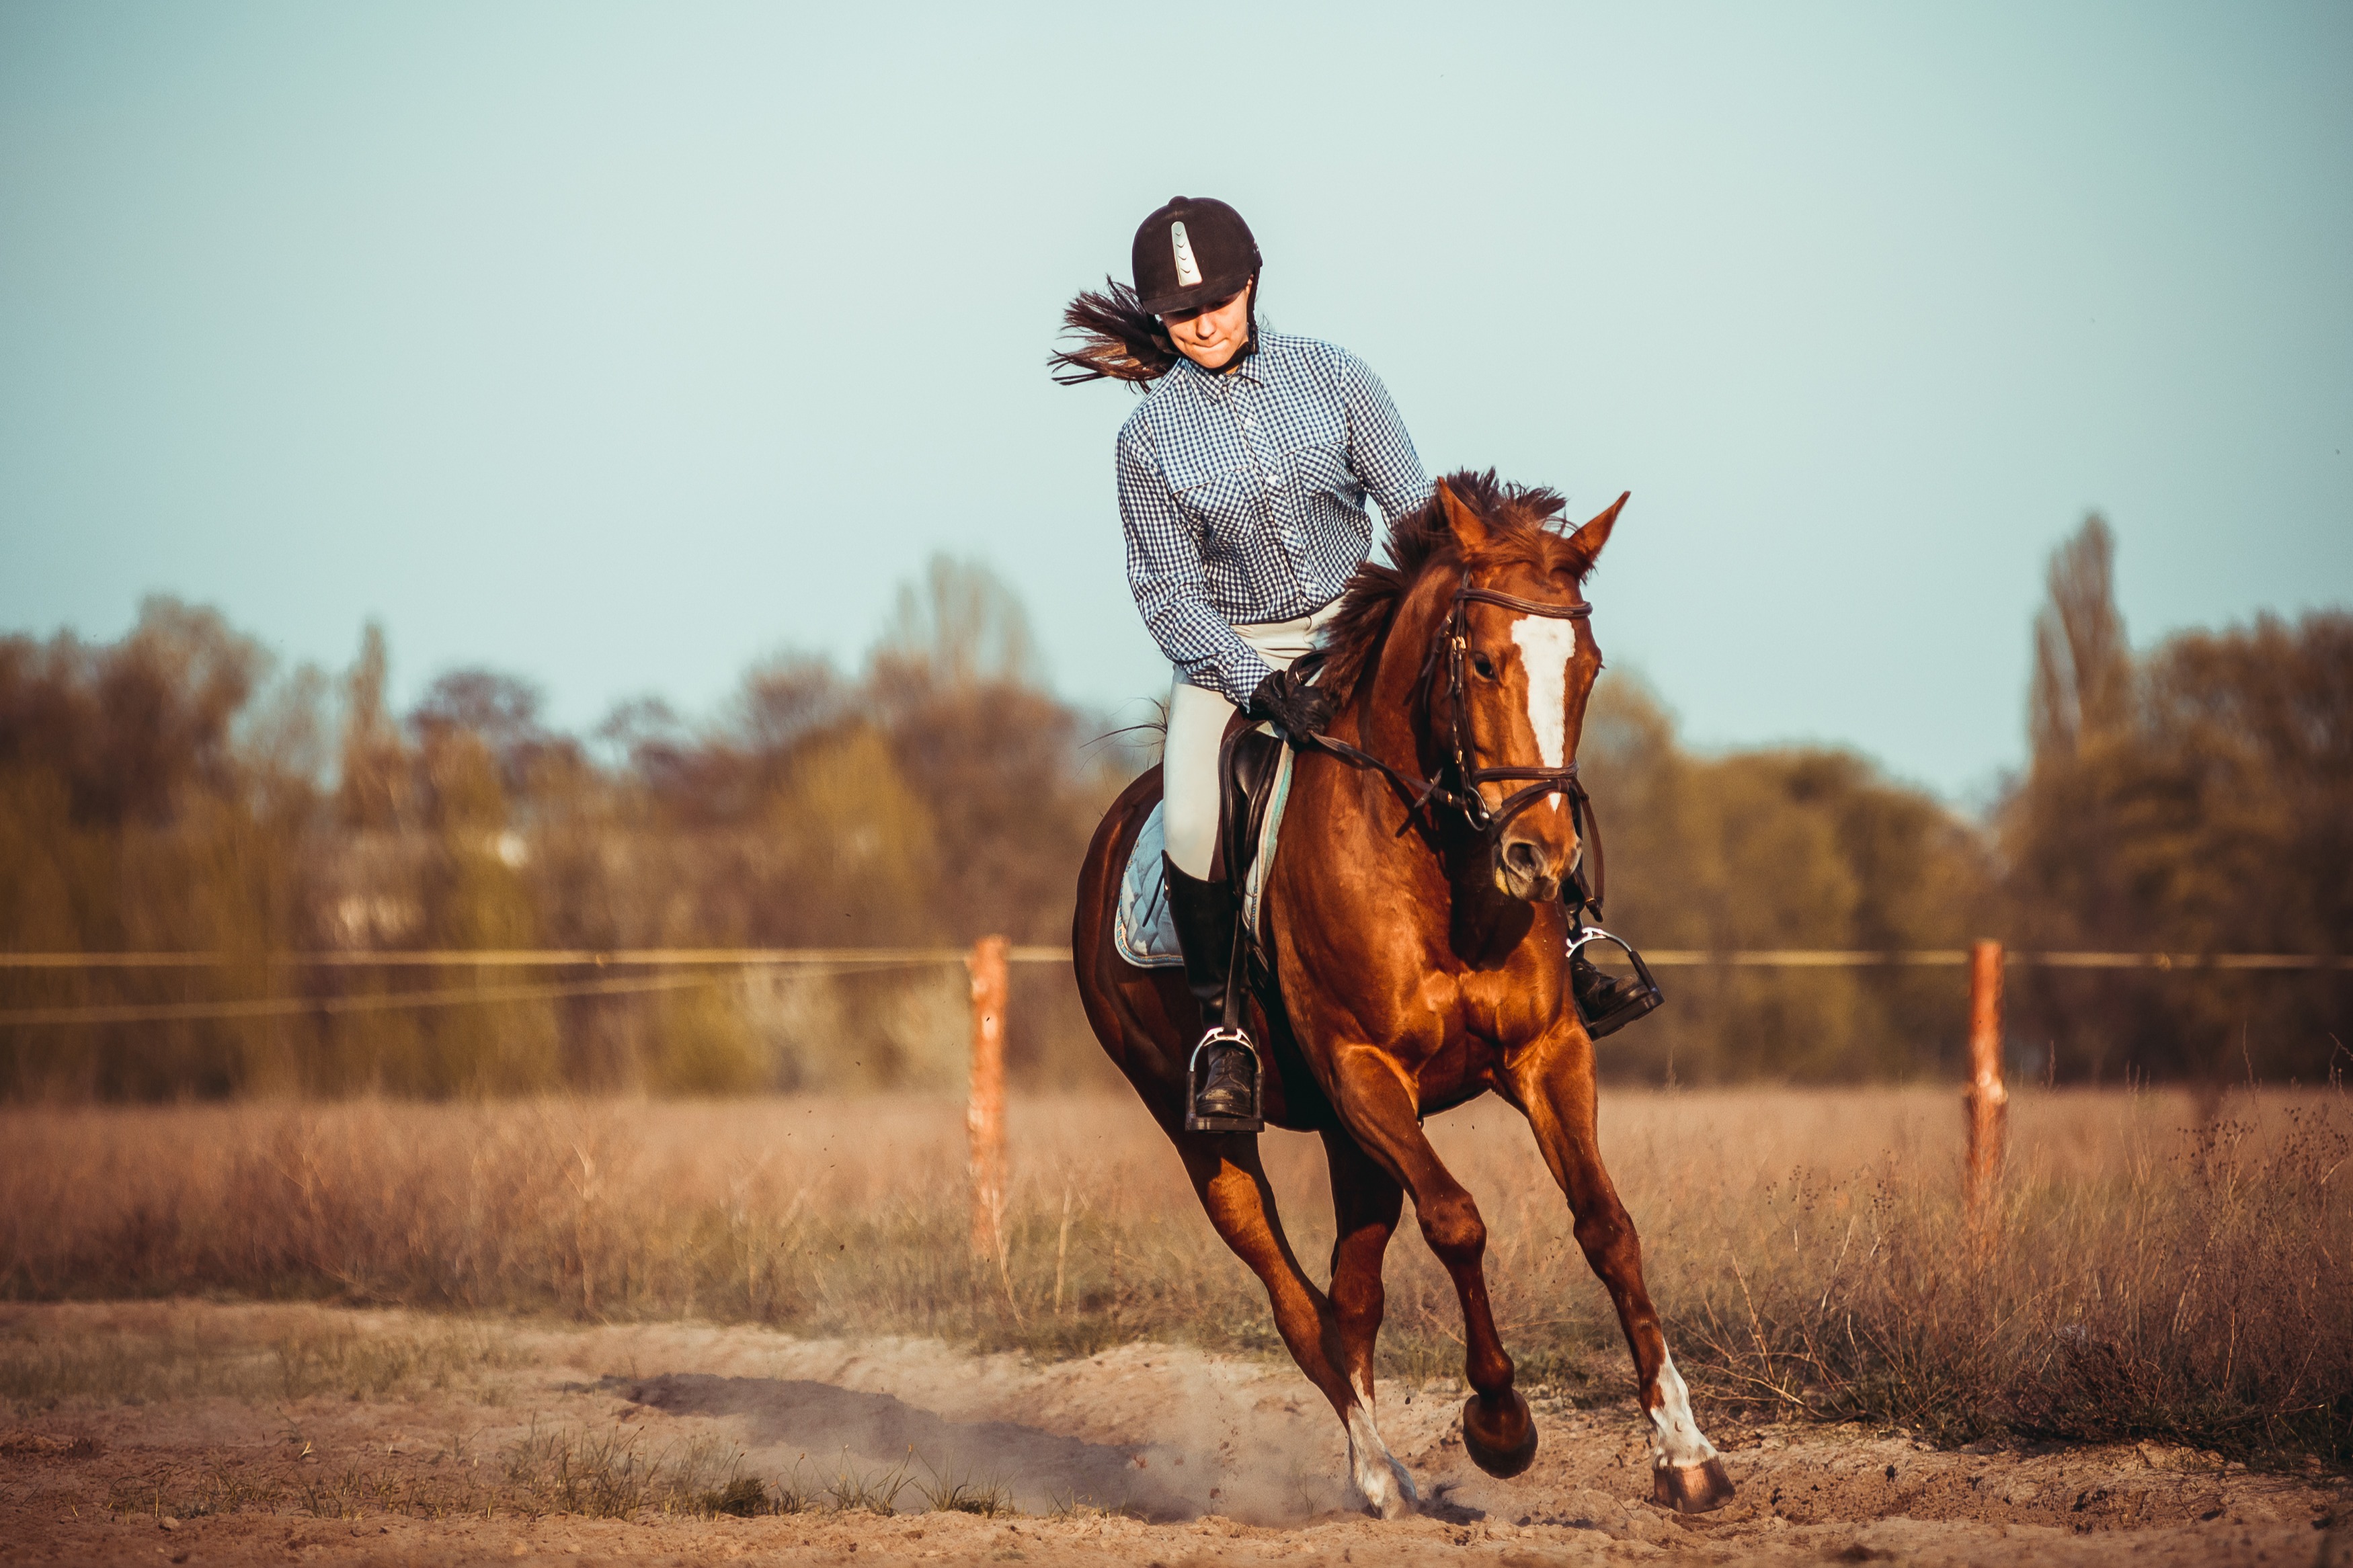 British Riding Clubs saddle up to join the Sport:80 community